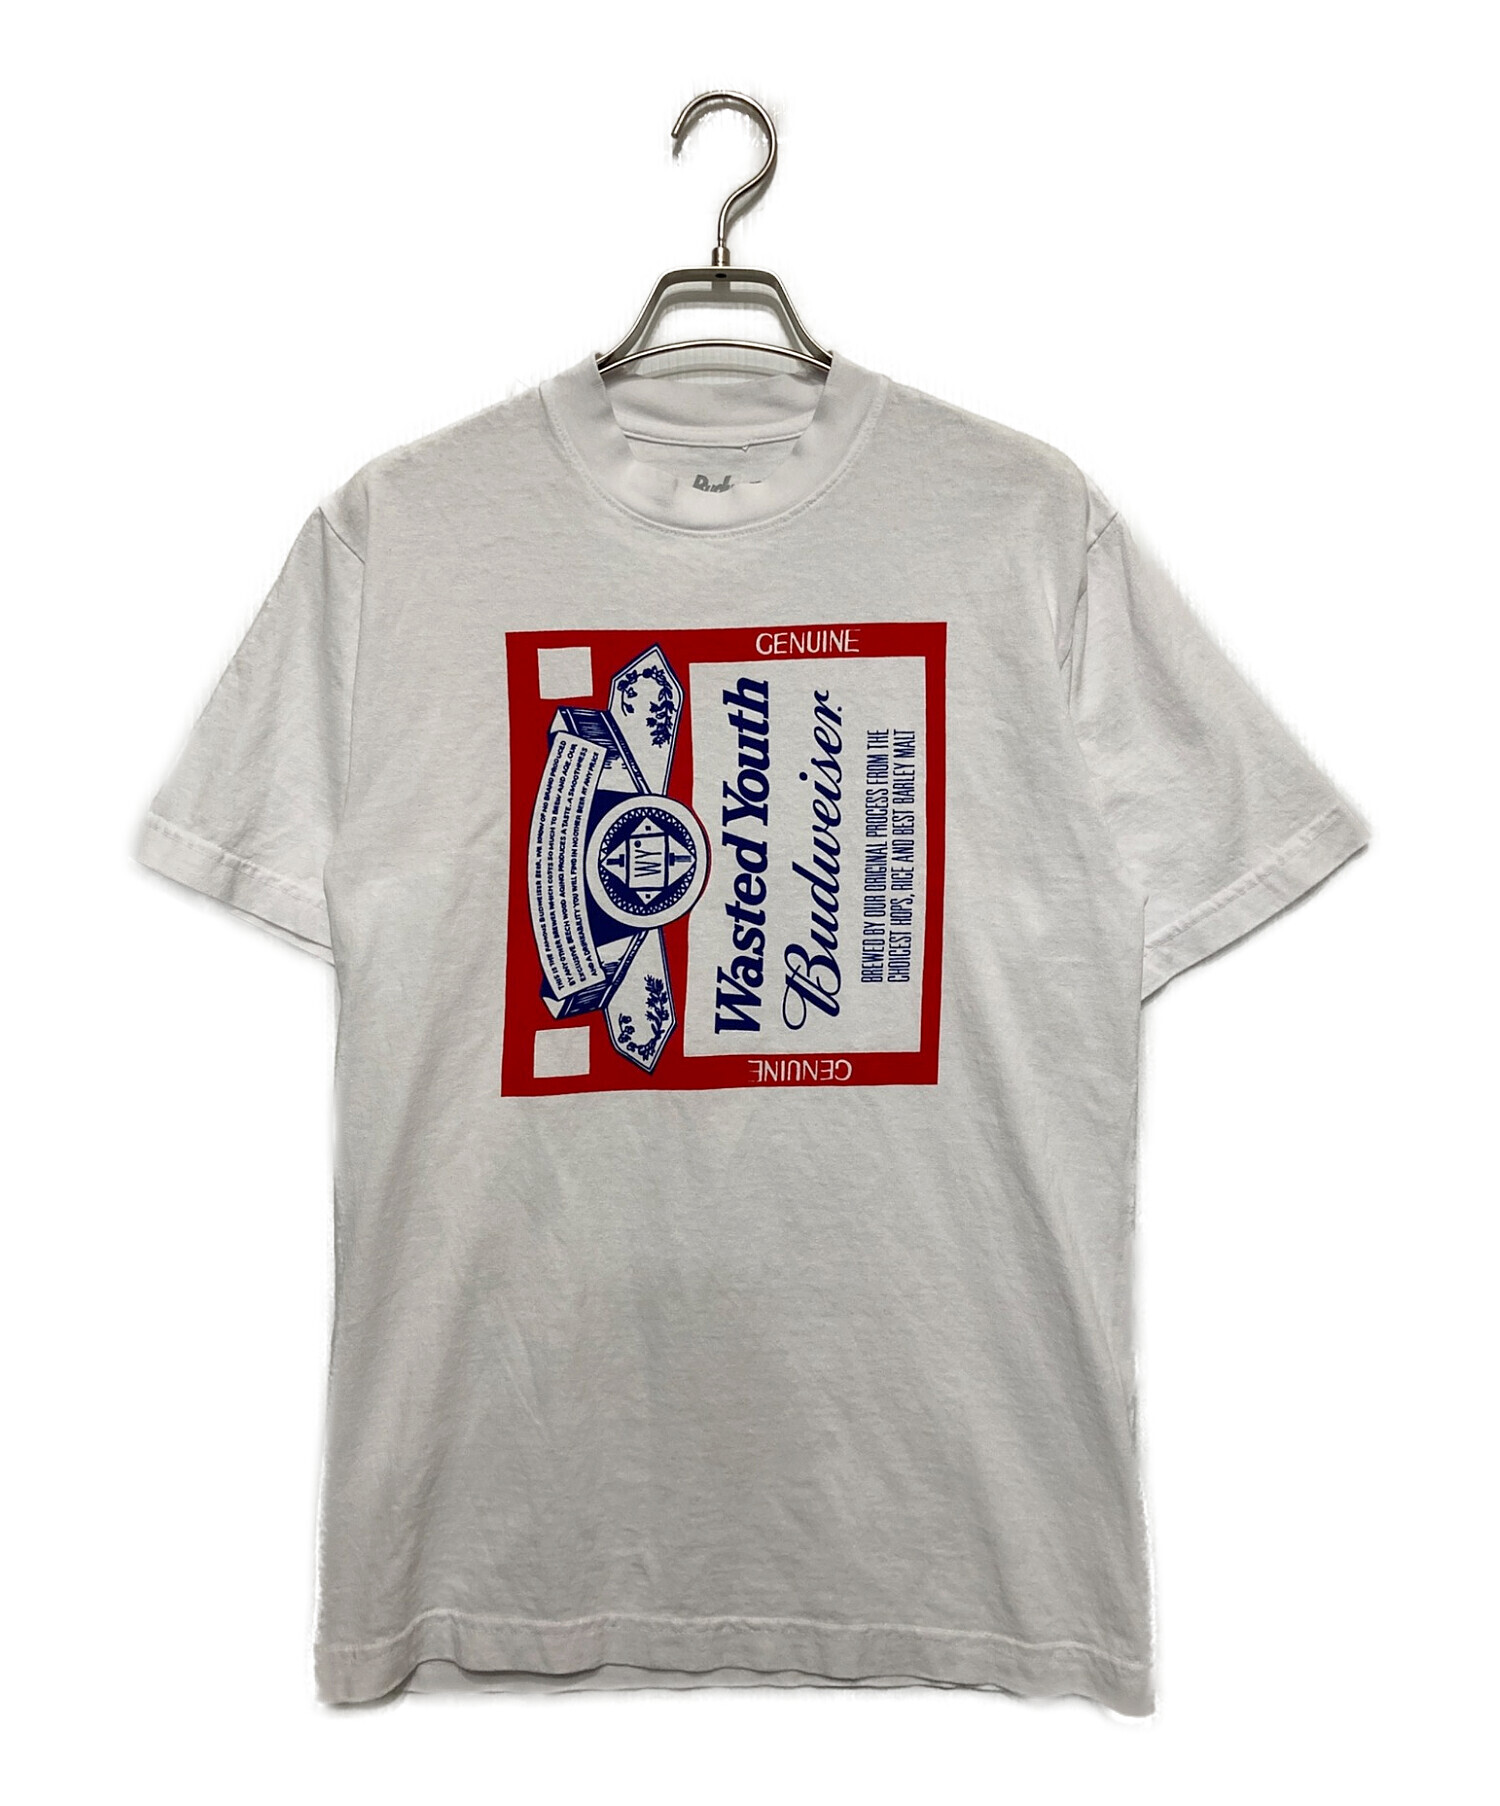 Wasted youth ×Budweiser Tシャツ